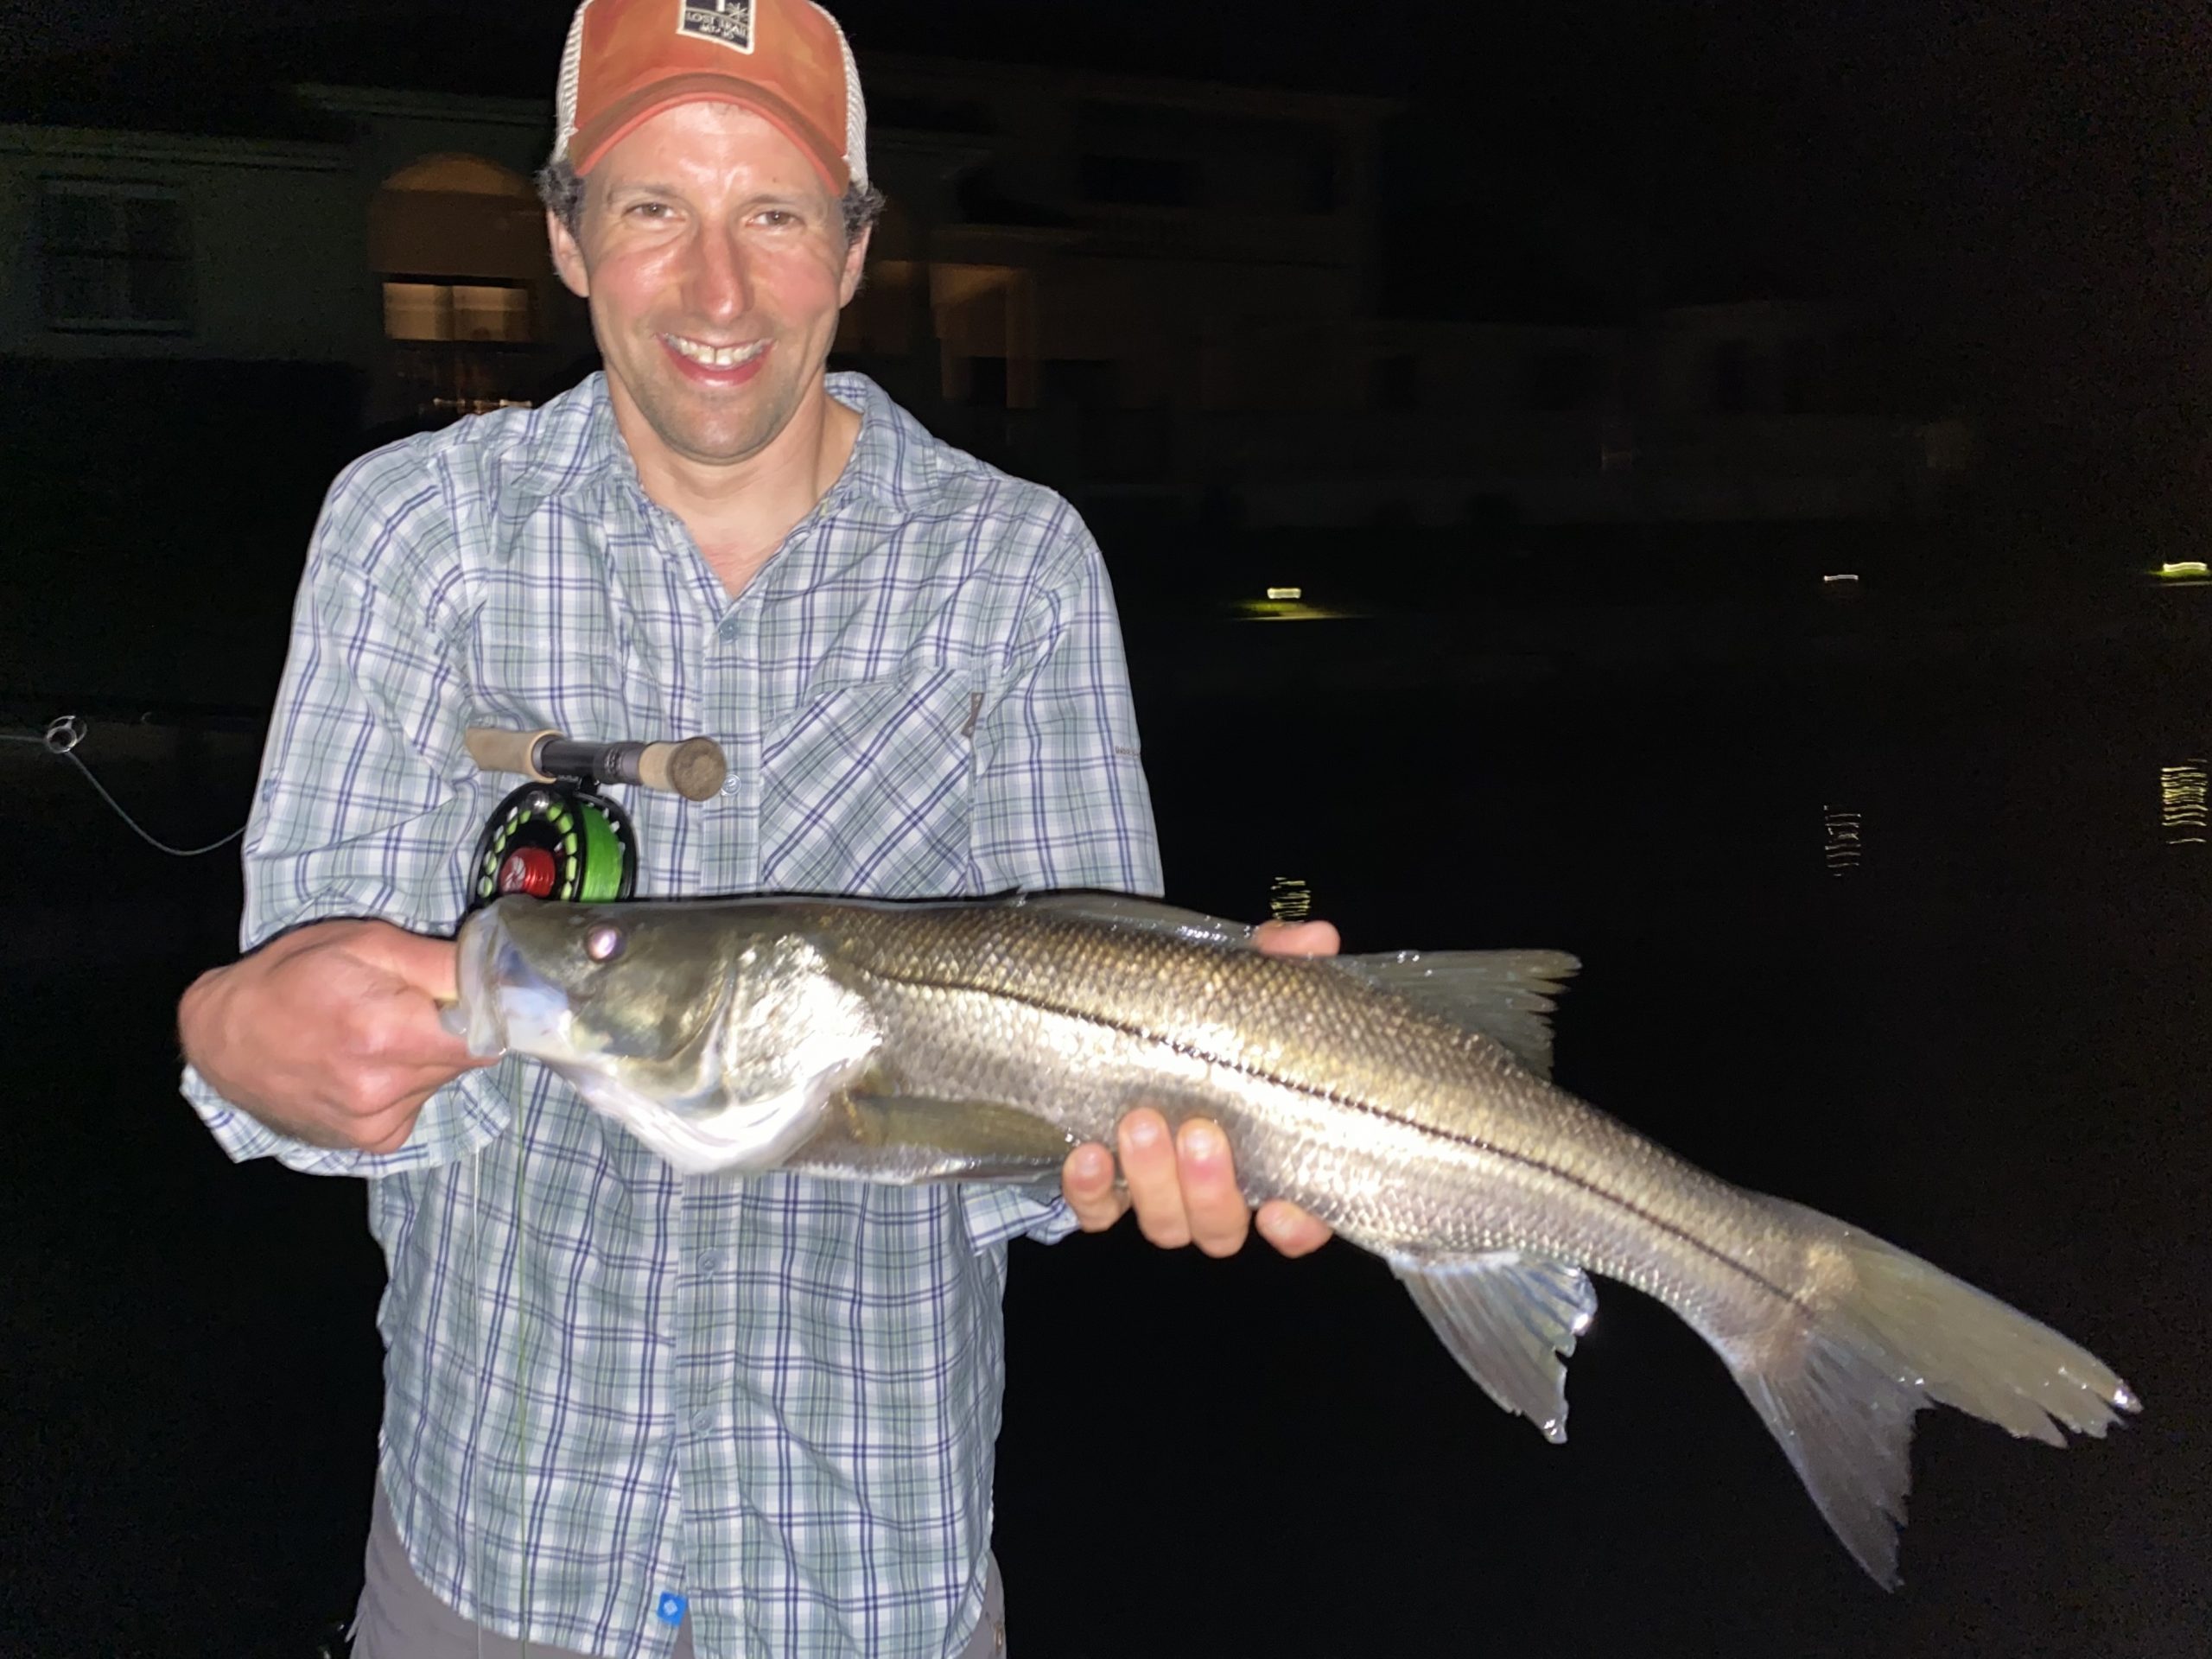 An angler holds a snook he caught while fly fishing